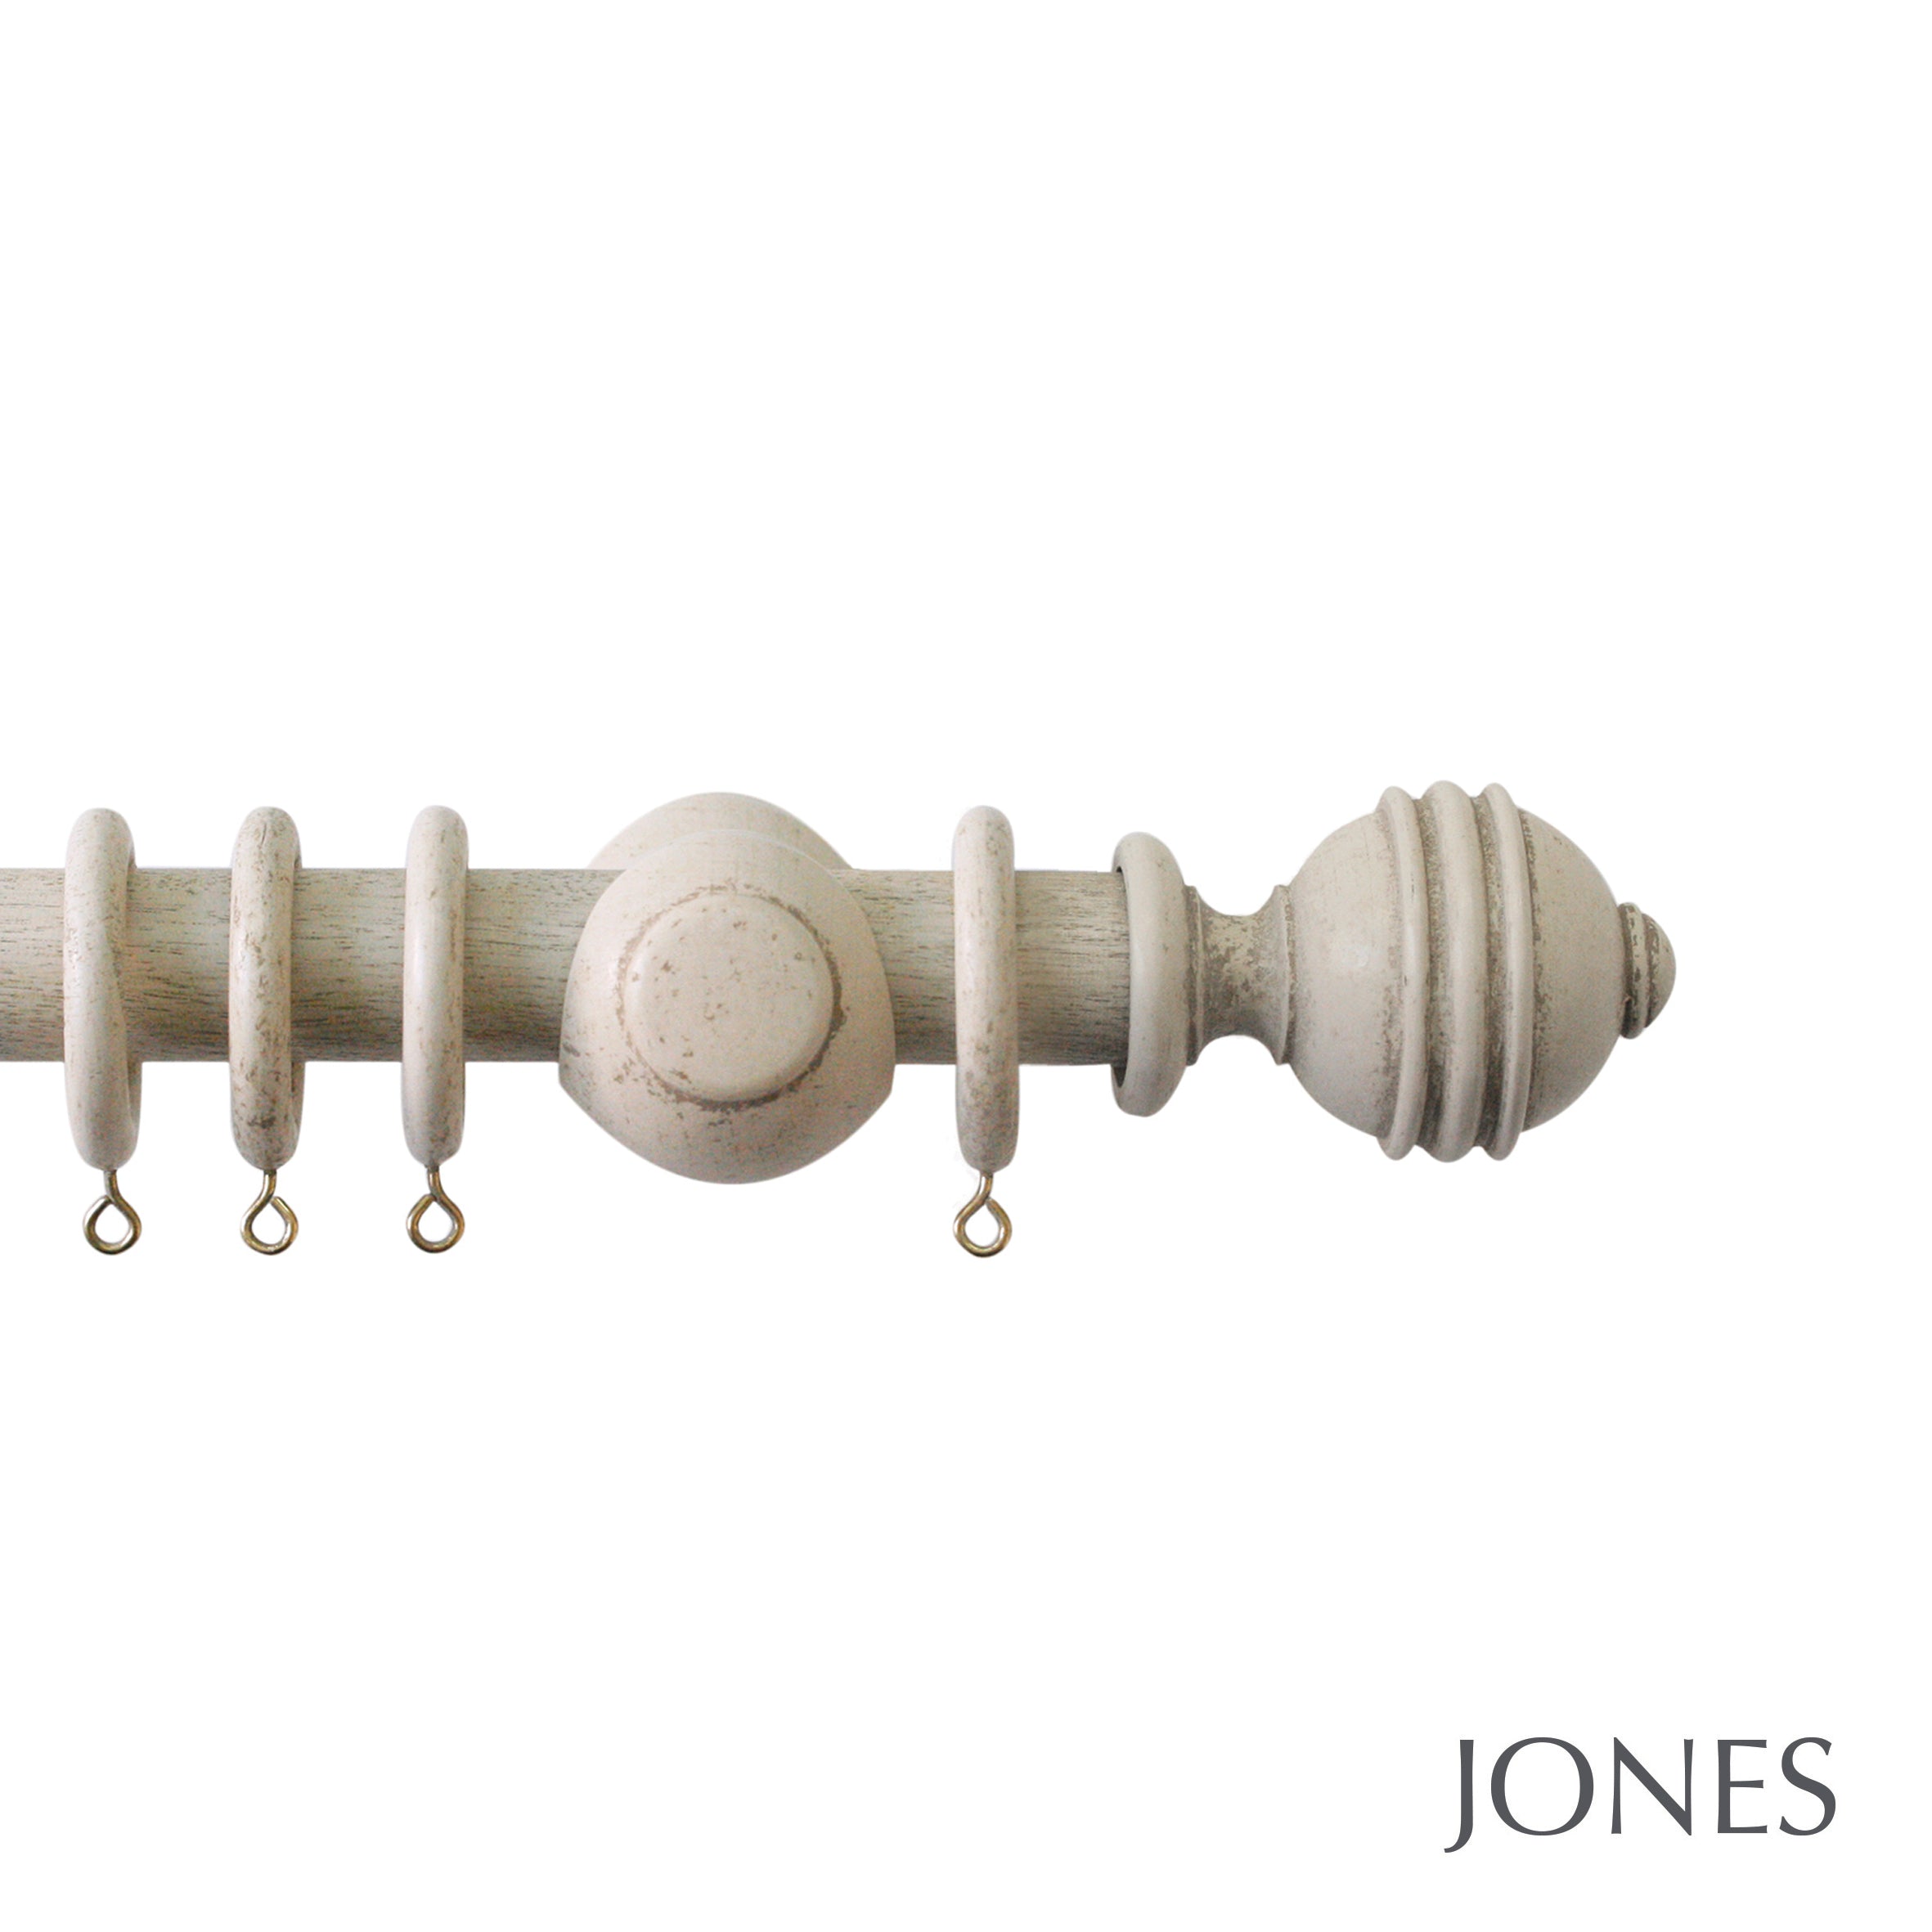 Jones Interiors Cathedral Ely Finial Curtain Pole Set in Putty